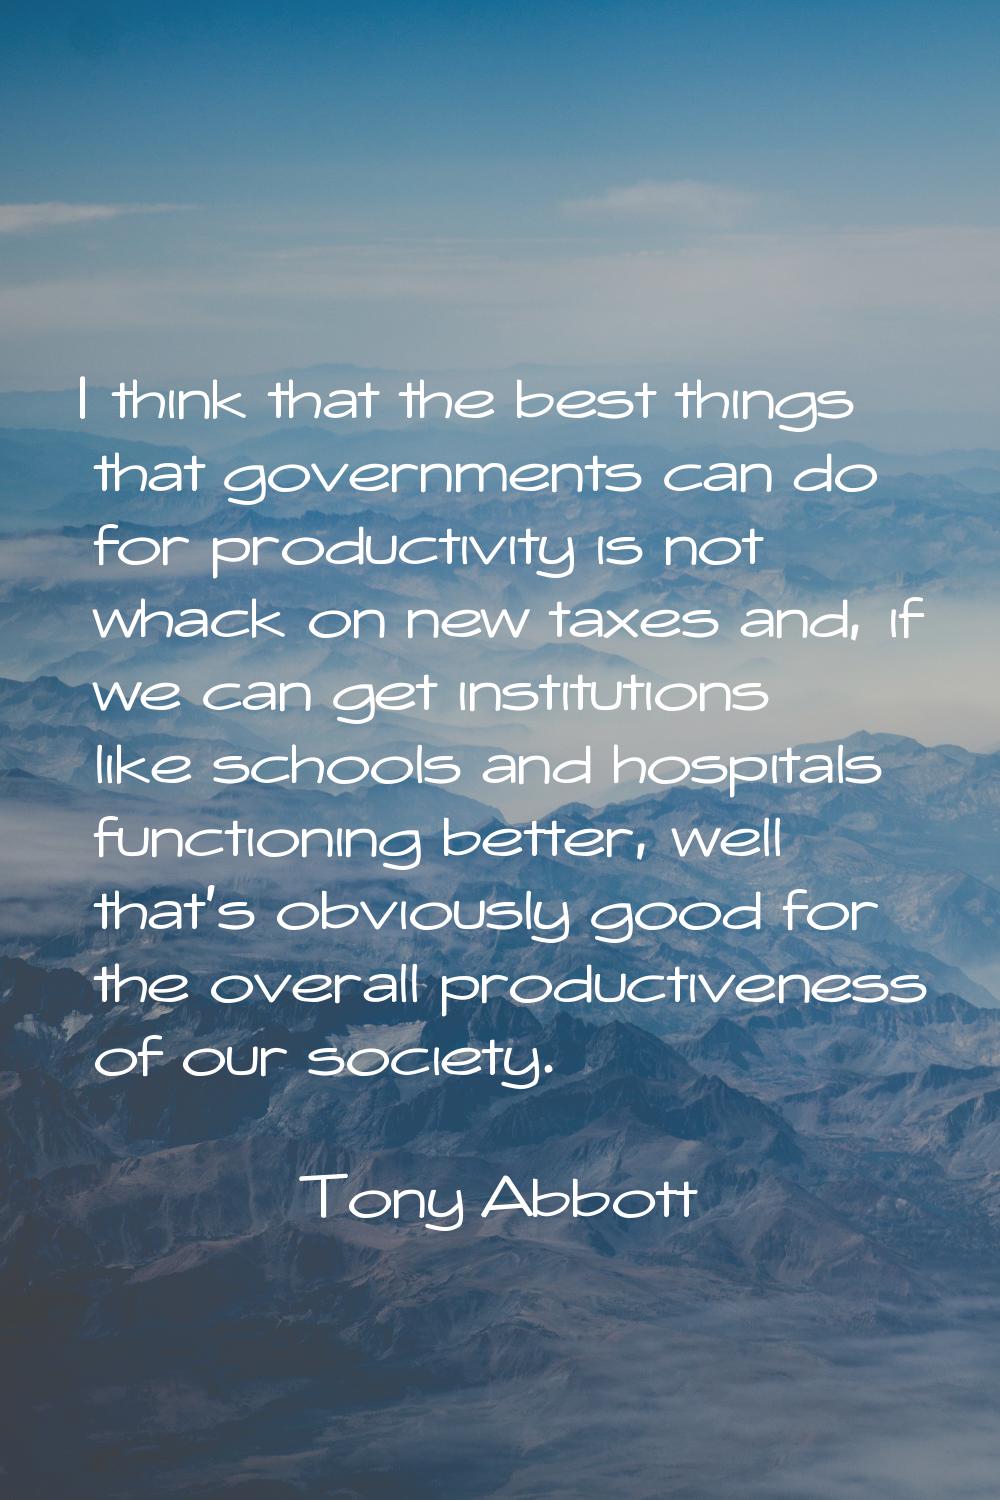 I think that the best things that governments can do for productivity is not whack on new taxes and